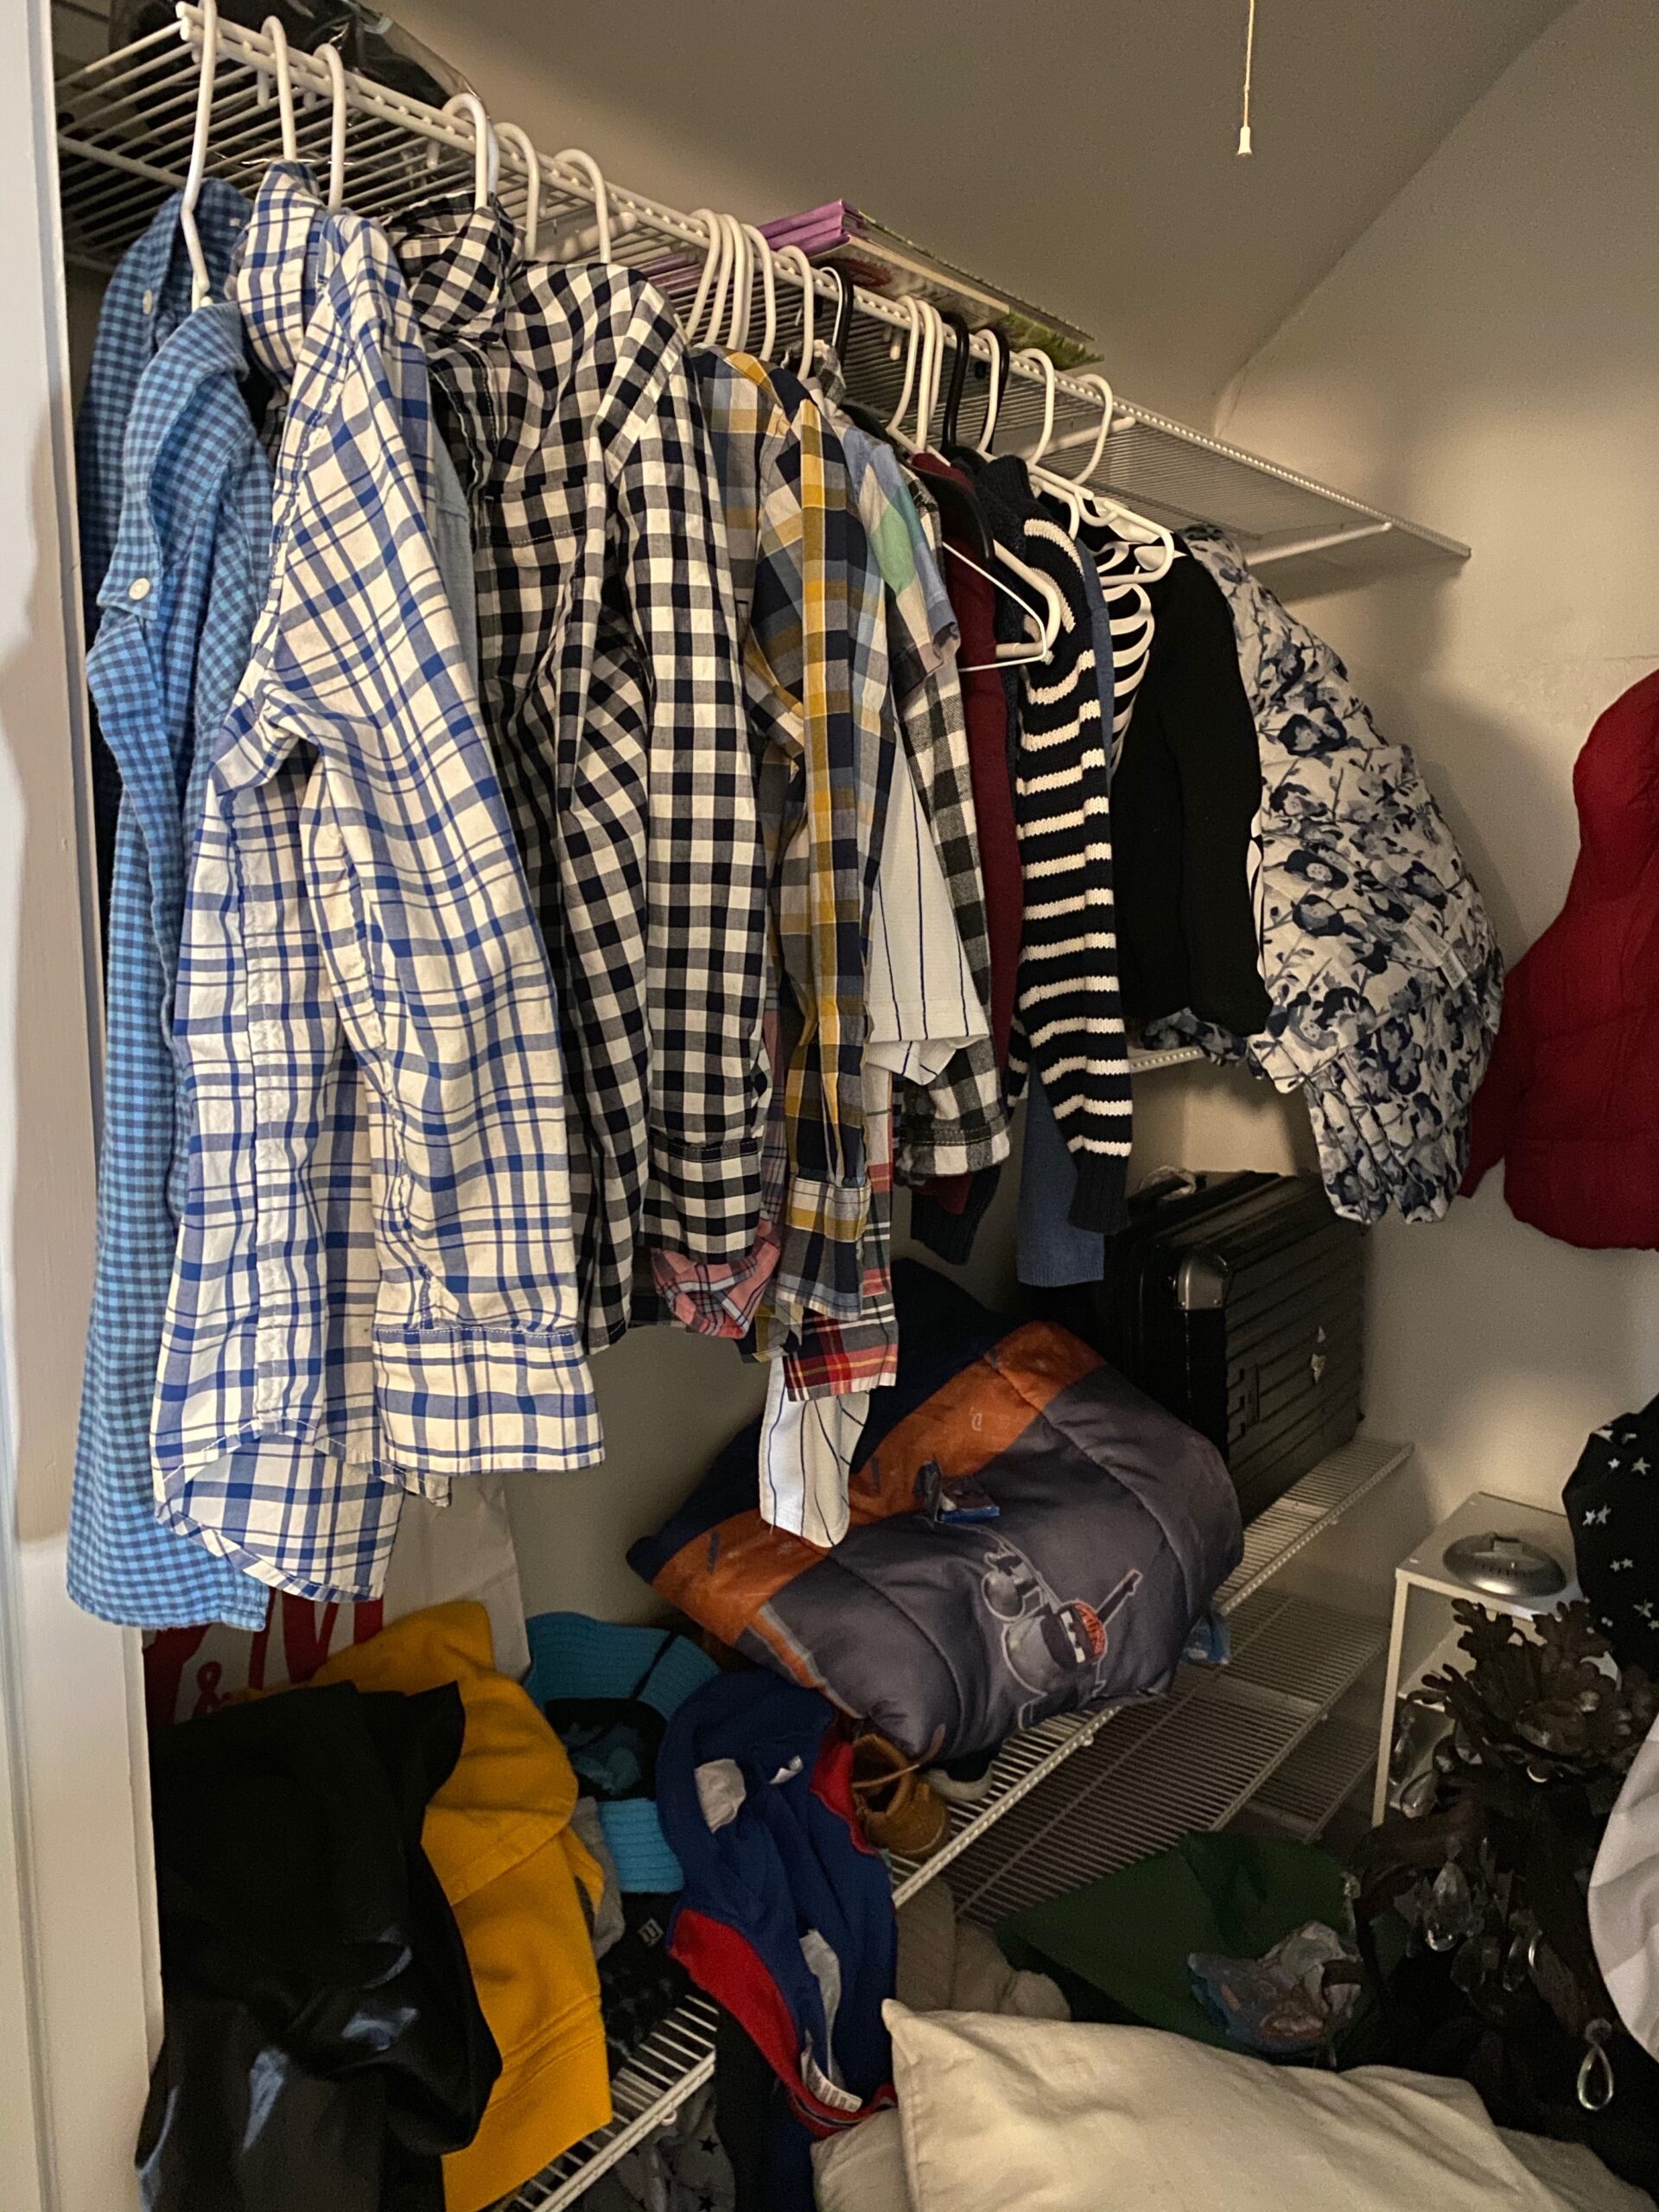 Boys' Closet Makeover before photo with clothes